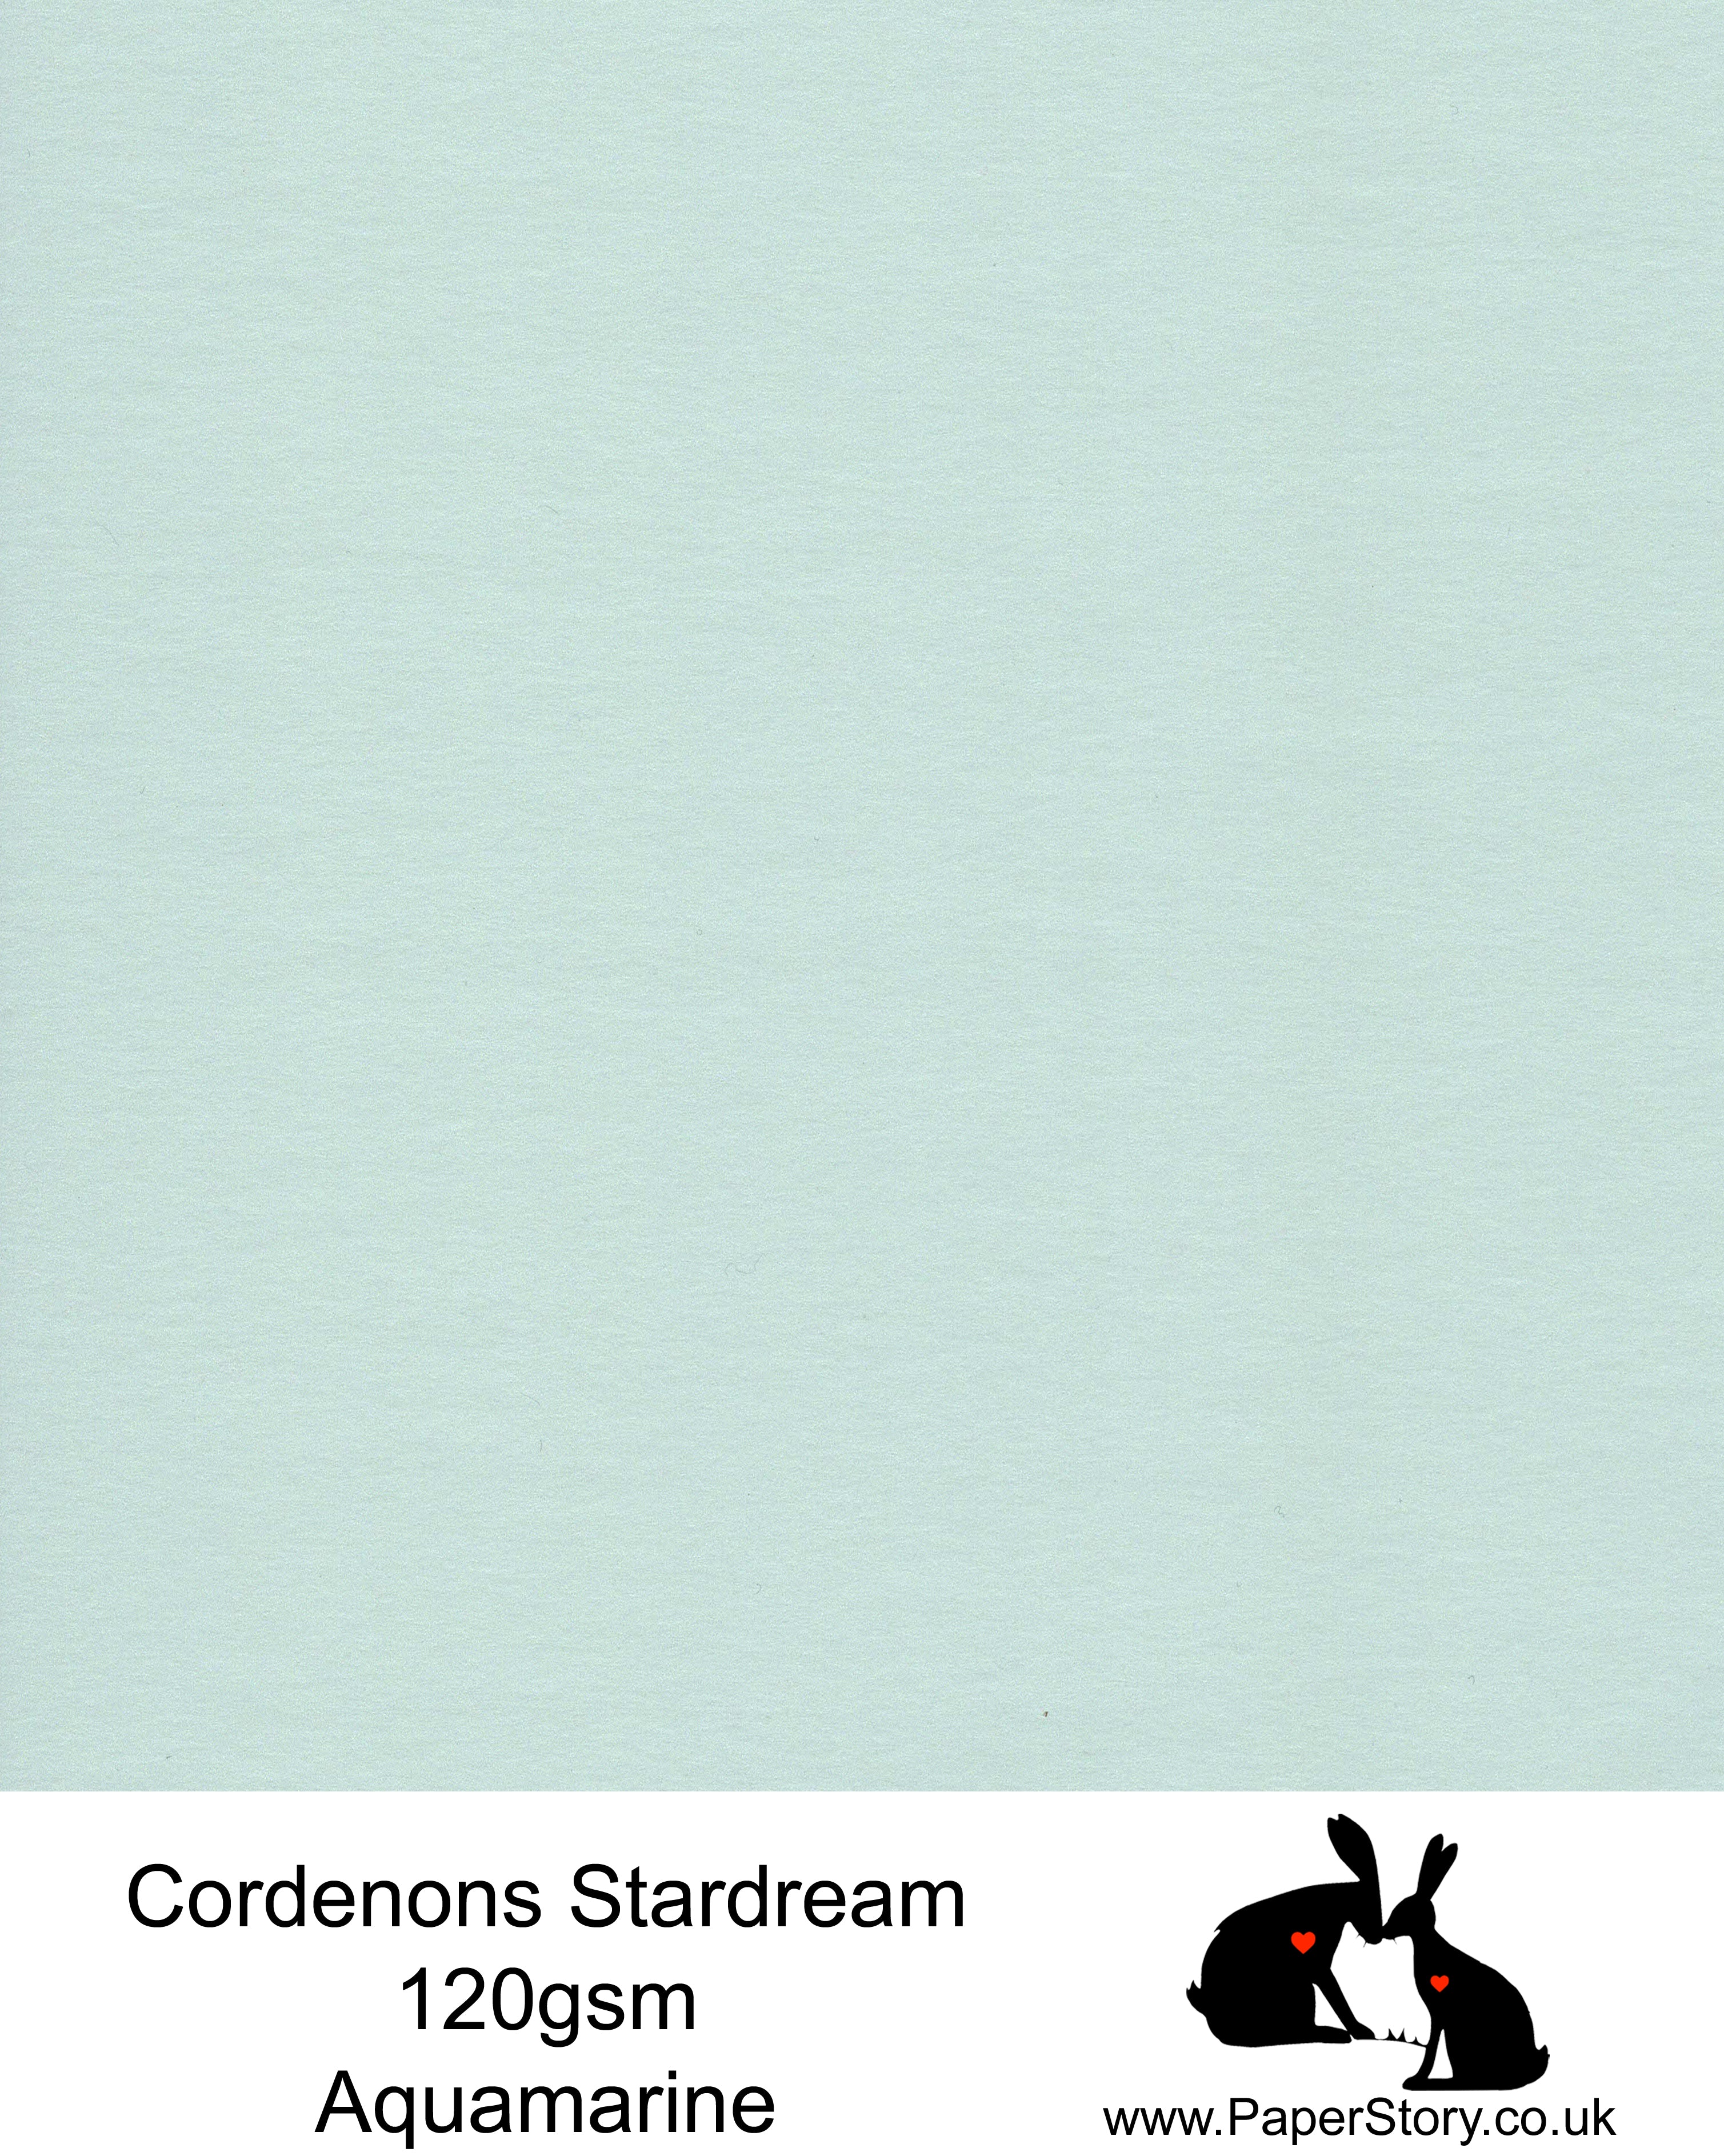 A4 Stardream 120gsm paper for Papercutting, craft, flower making  and wedding stationery. Stunning mint green. Stardream is a luxury Italian paper from Italy, it is a double sided quality Pearlescent paper with a matching colour core. FSC Certified, acid free, archival and PH Neutral